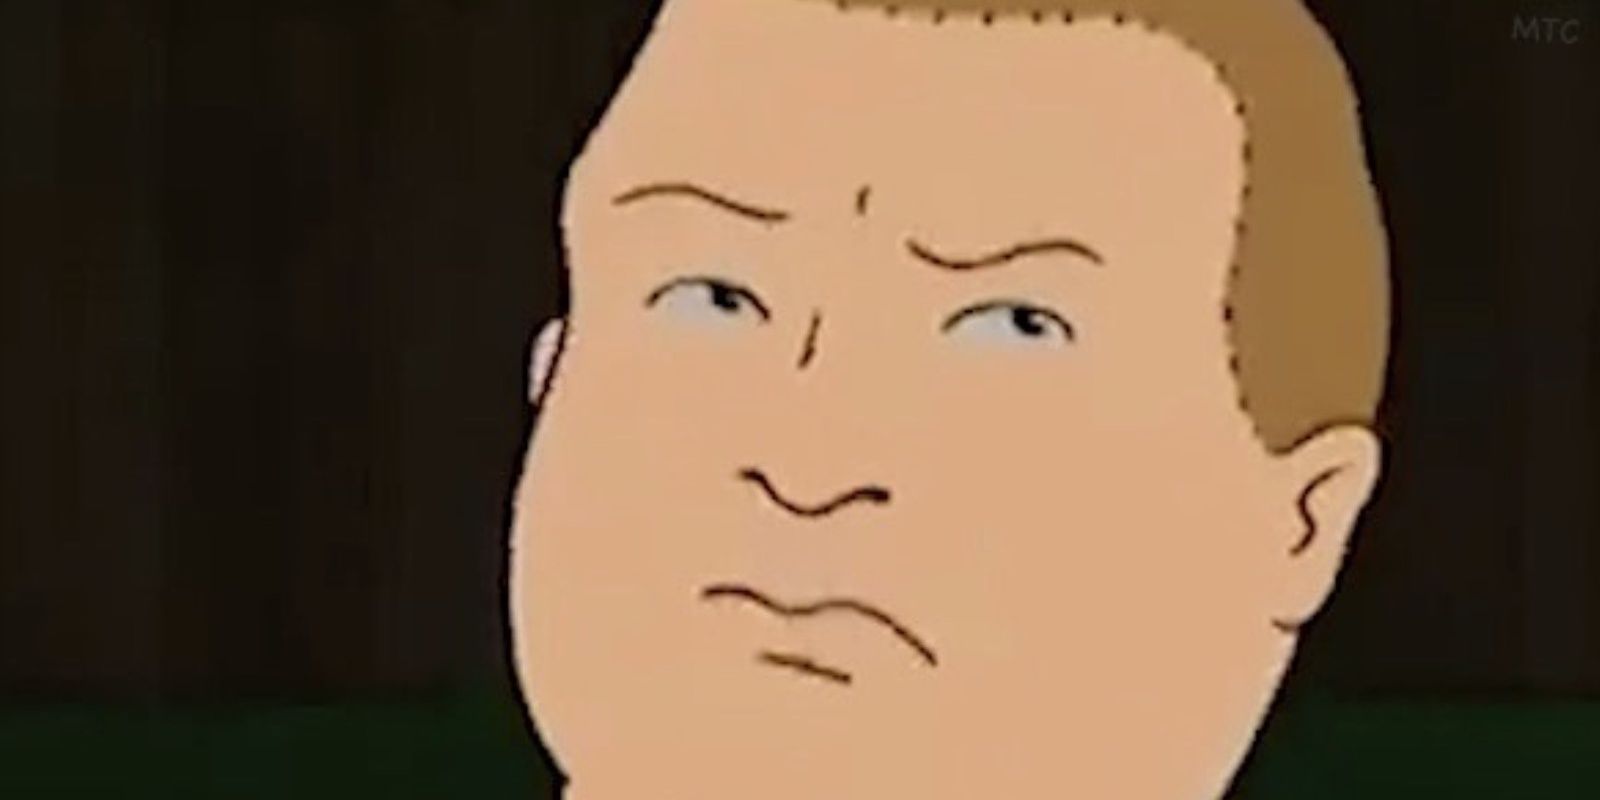 Bobby Hill Pulling A Sour Face